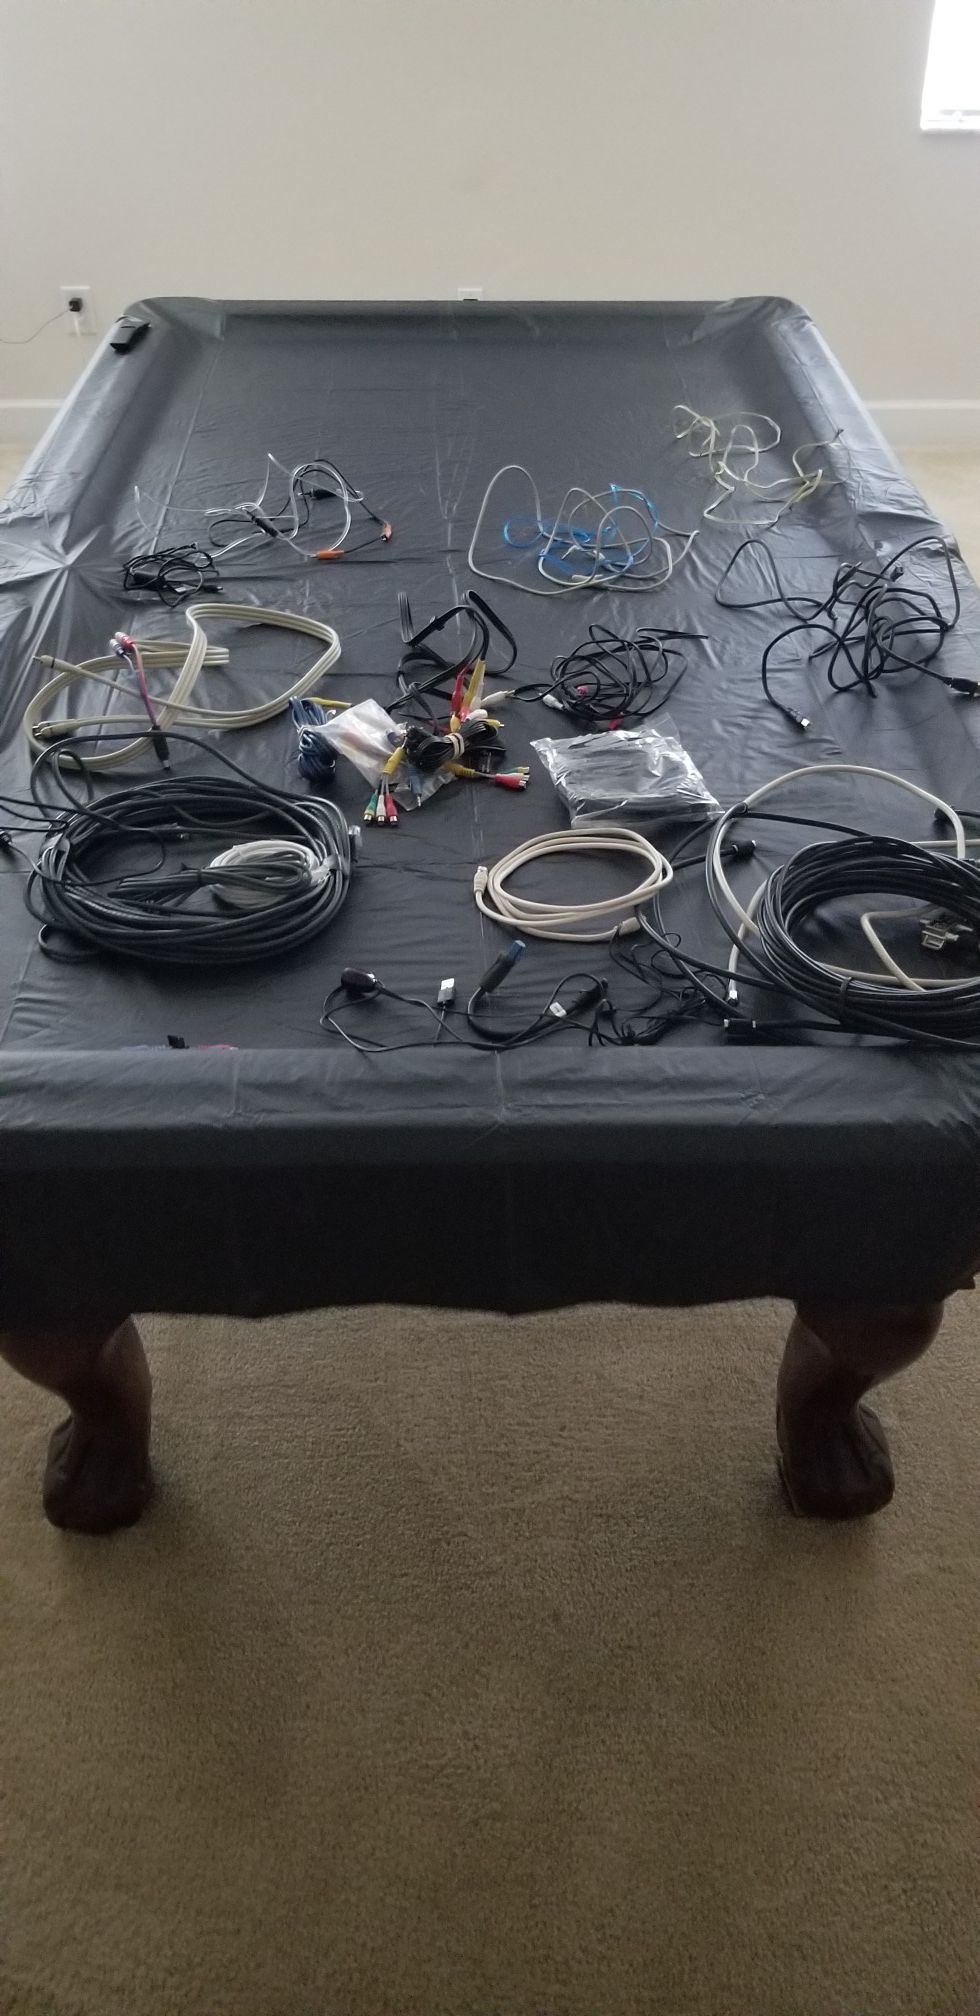 Lot of cables and cords - audio, video, stereo, cable